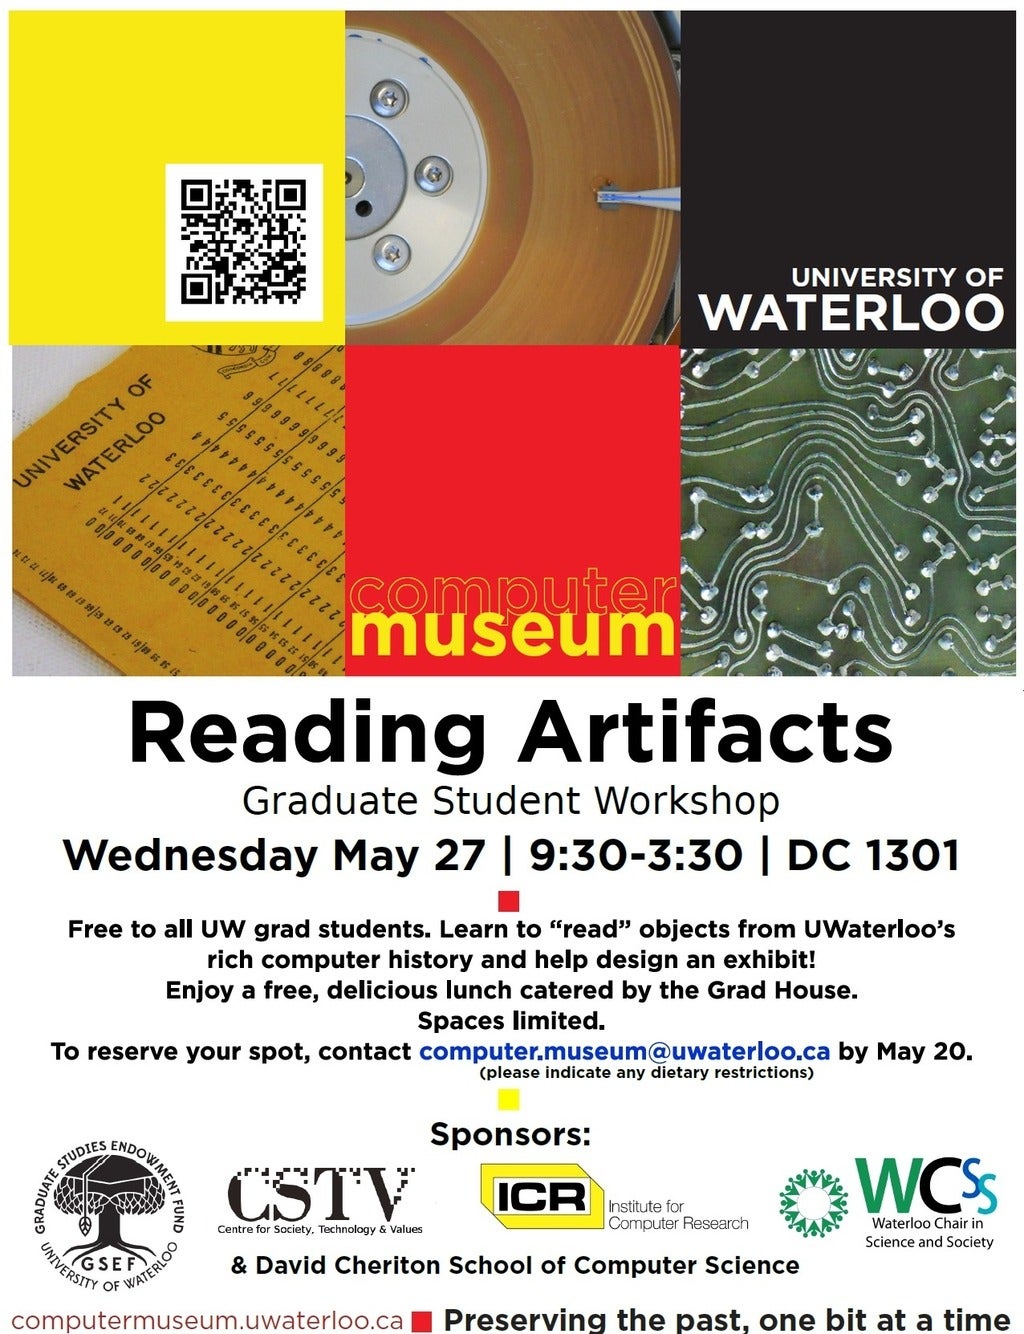 Reading Artifacts Graduate Student Workshop May 27, 2015